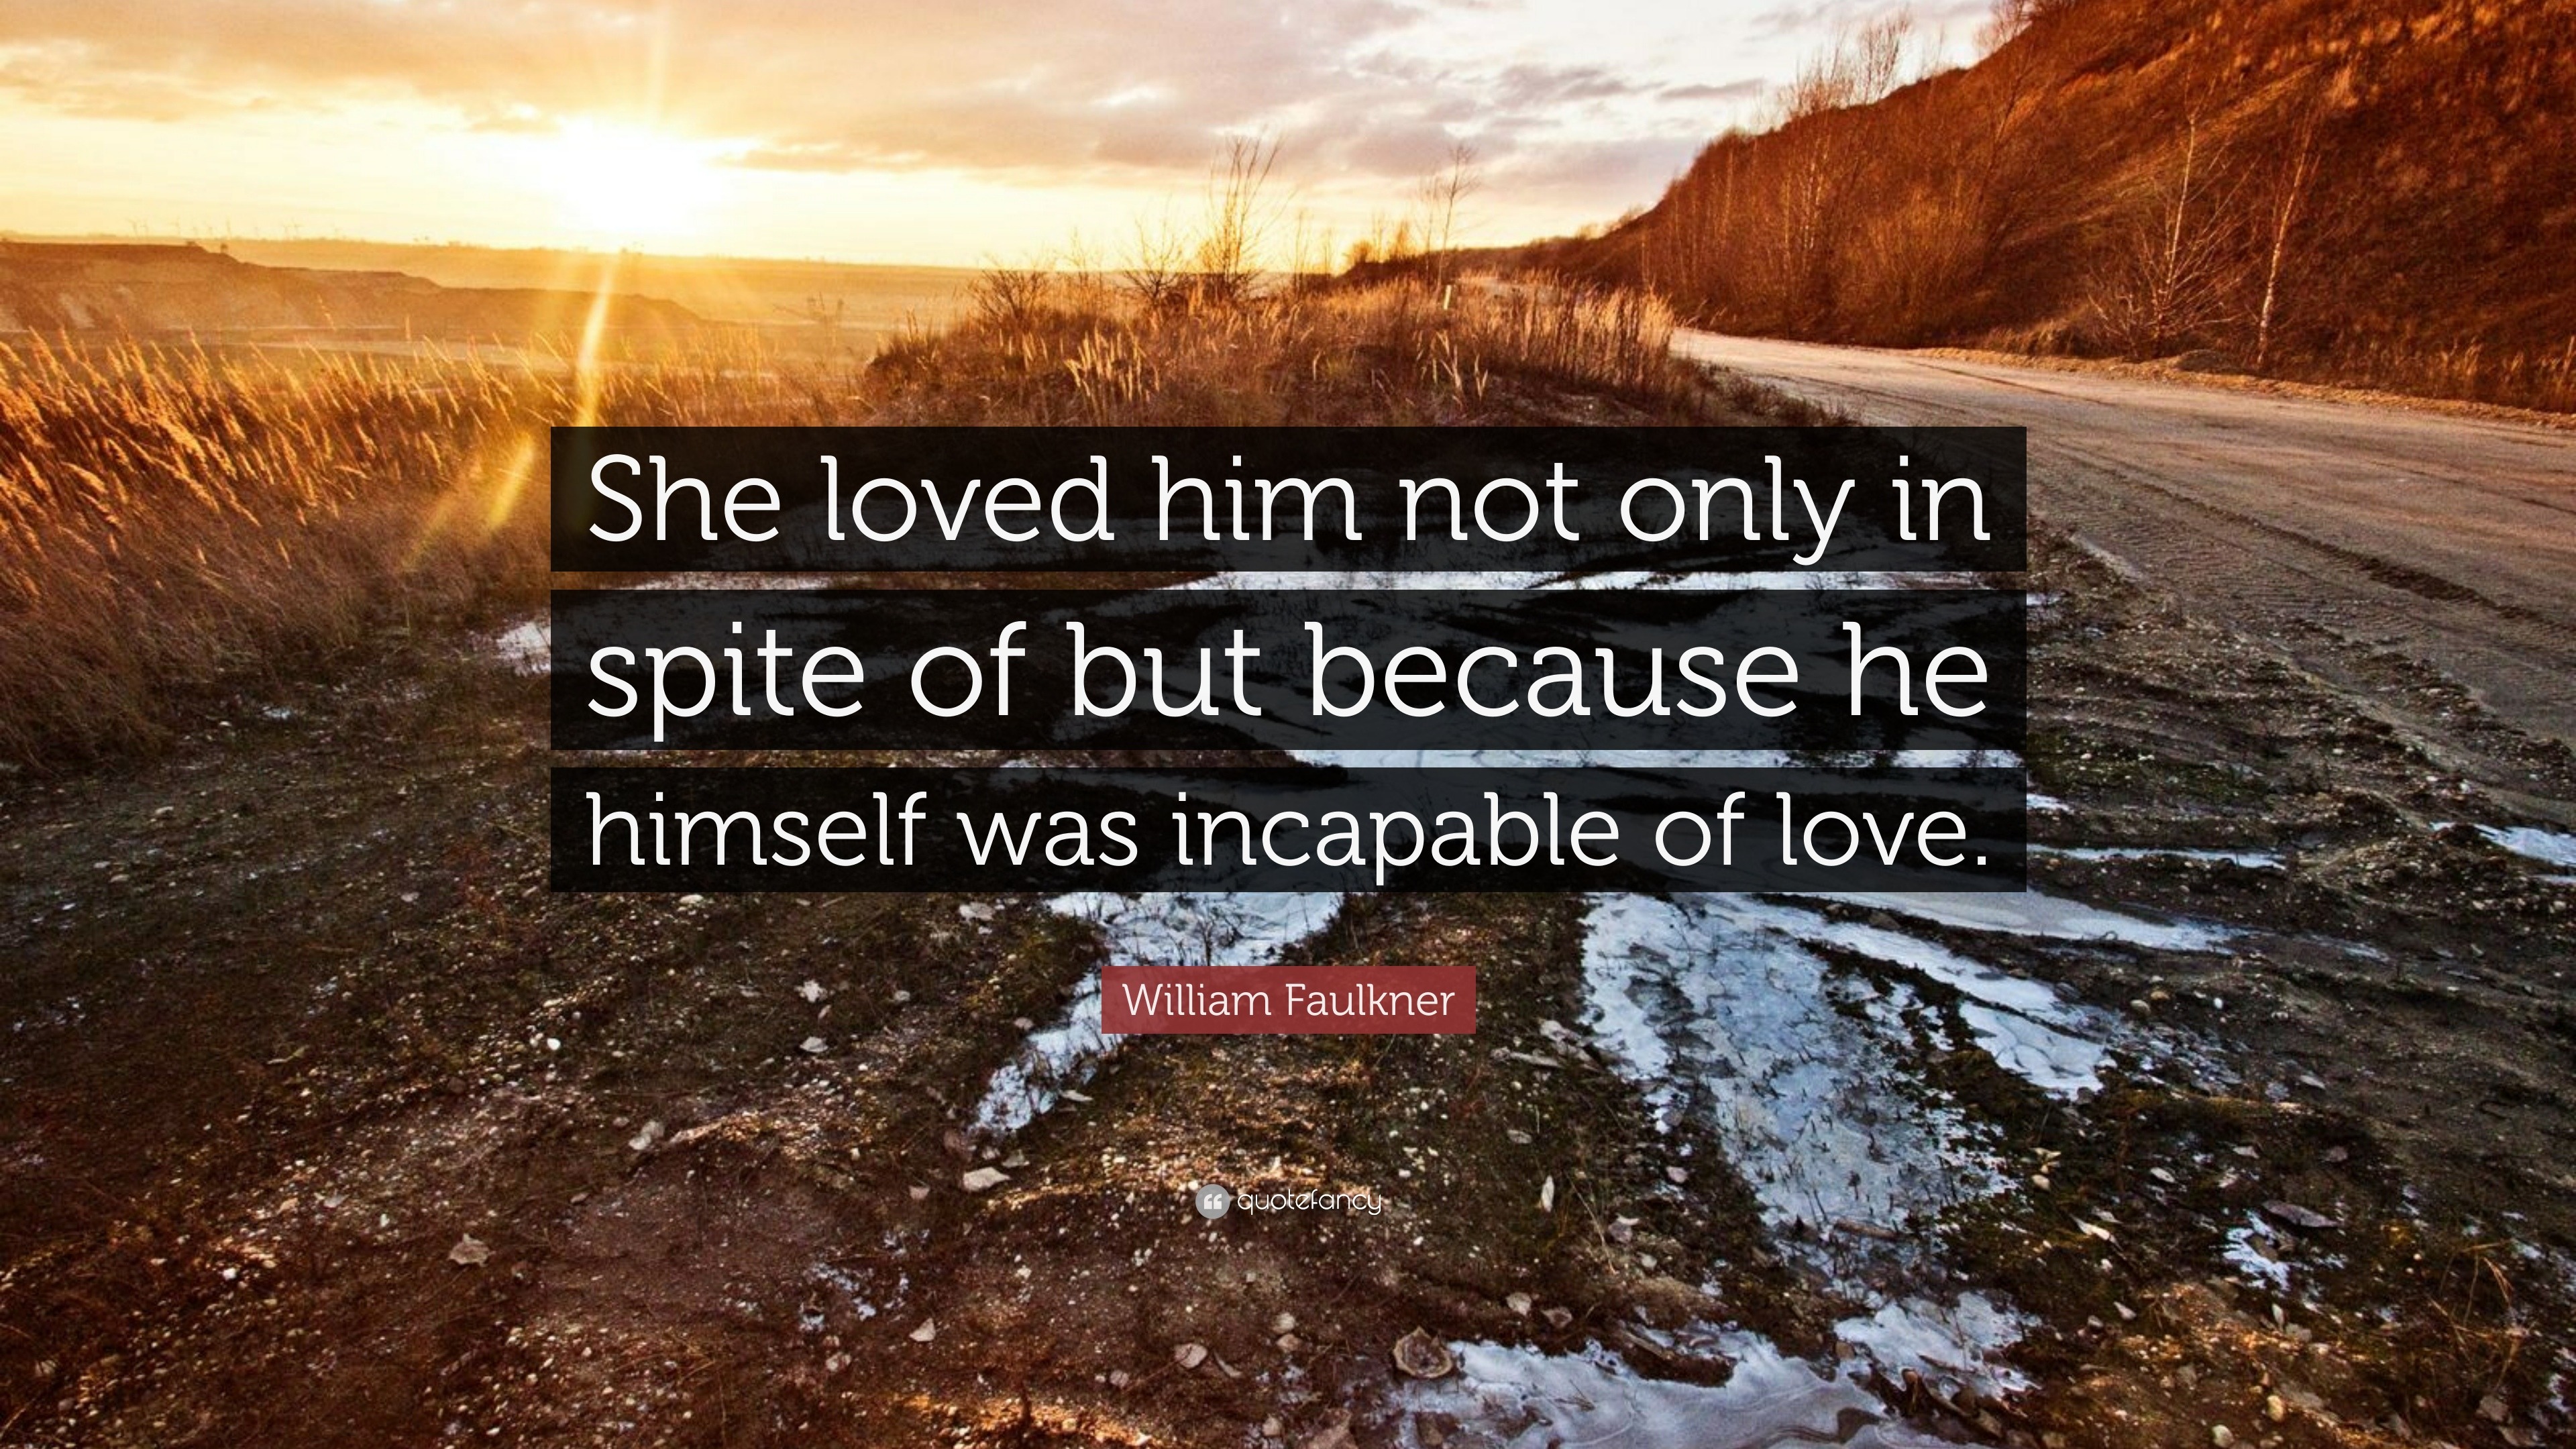 William Faulkner Quote: “She loved him not only in spite of but because ...